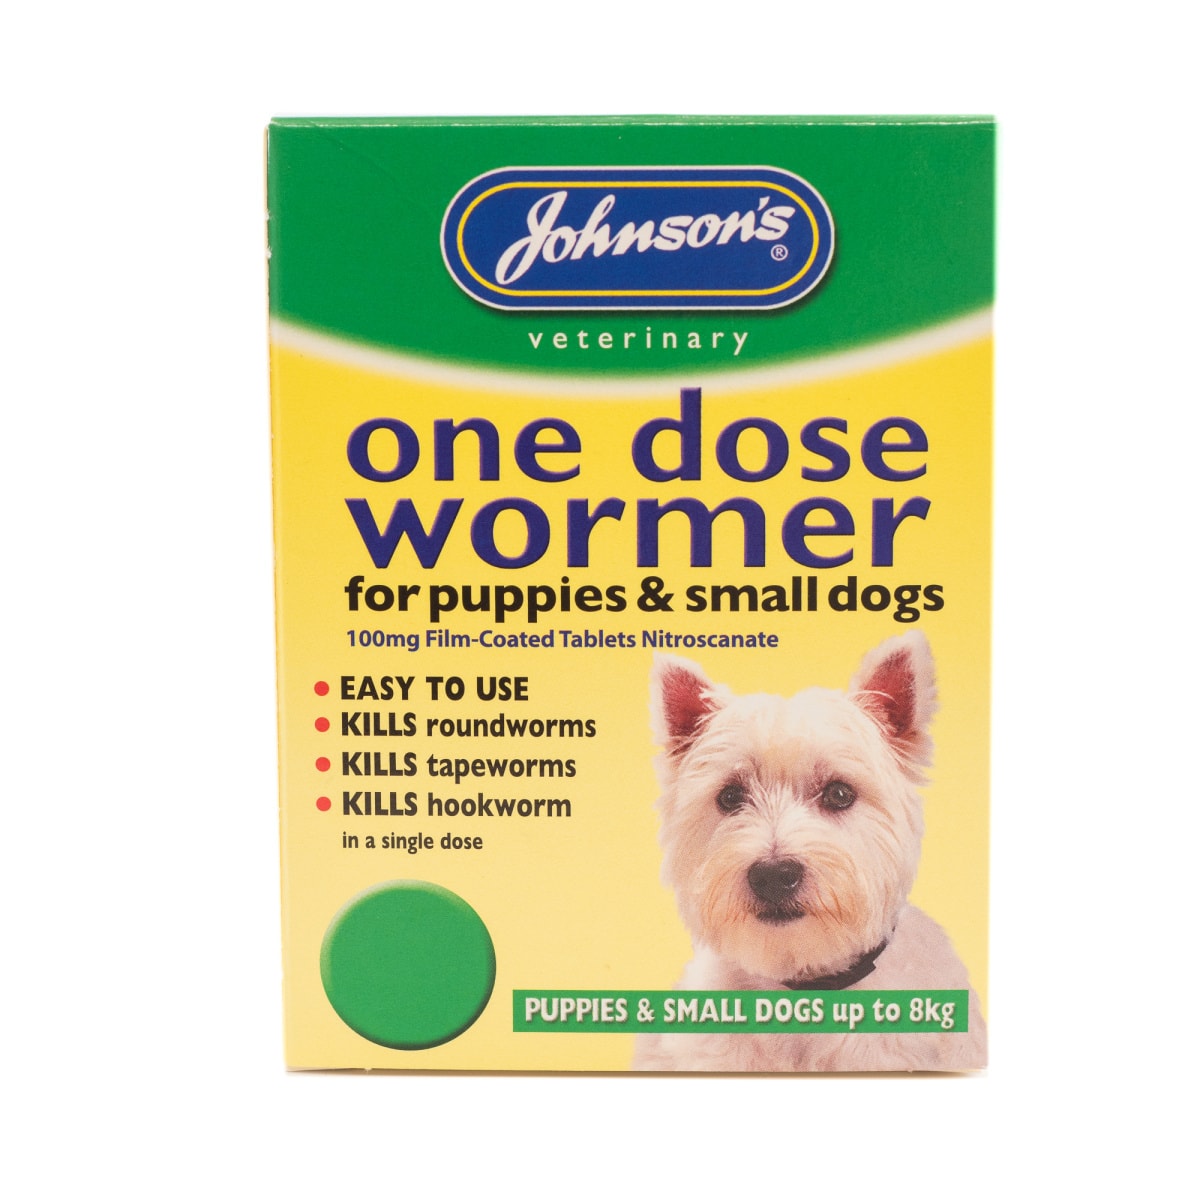 Johnson's One Dose Wormer – Size 1 Main Image